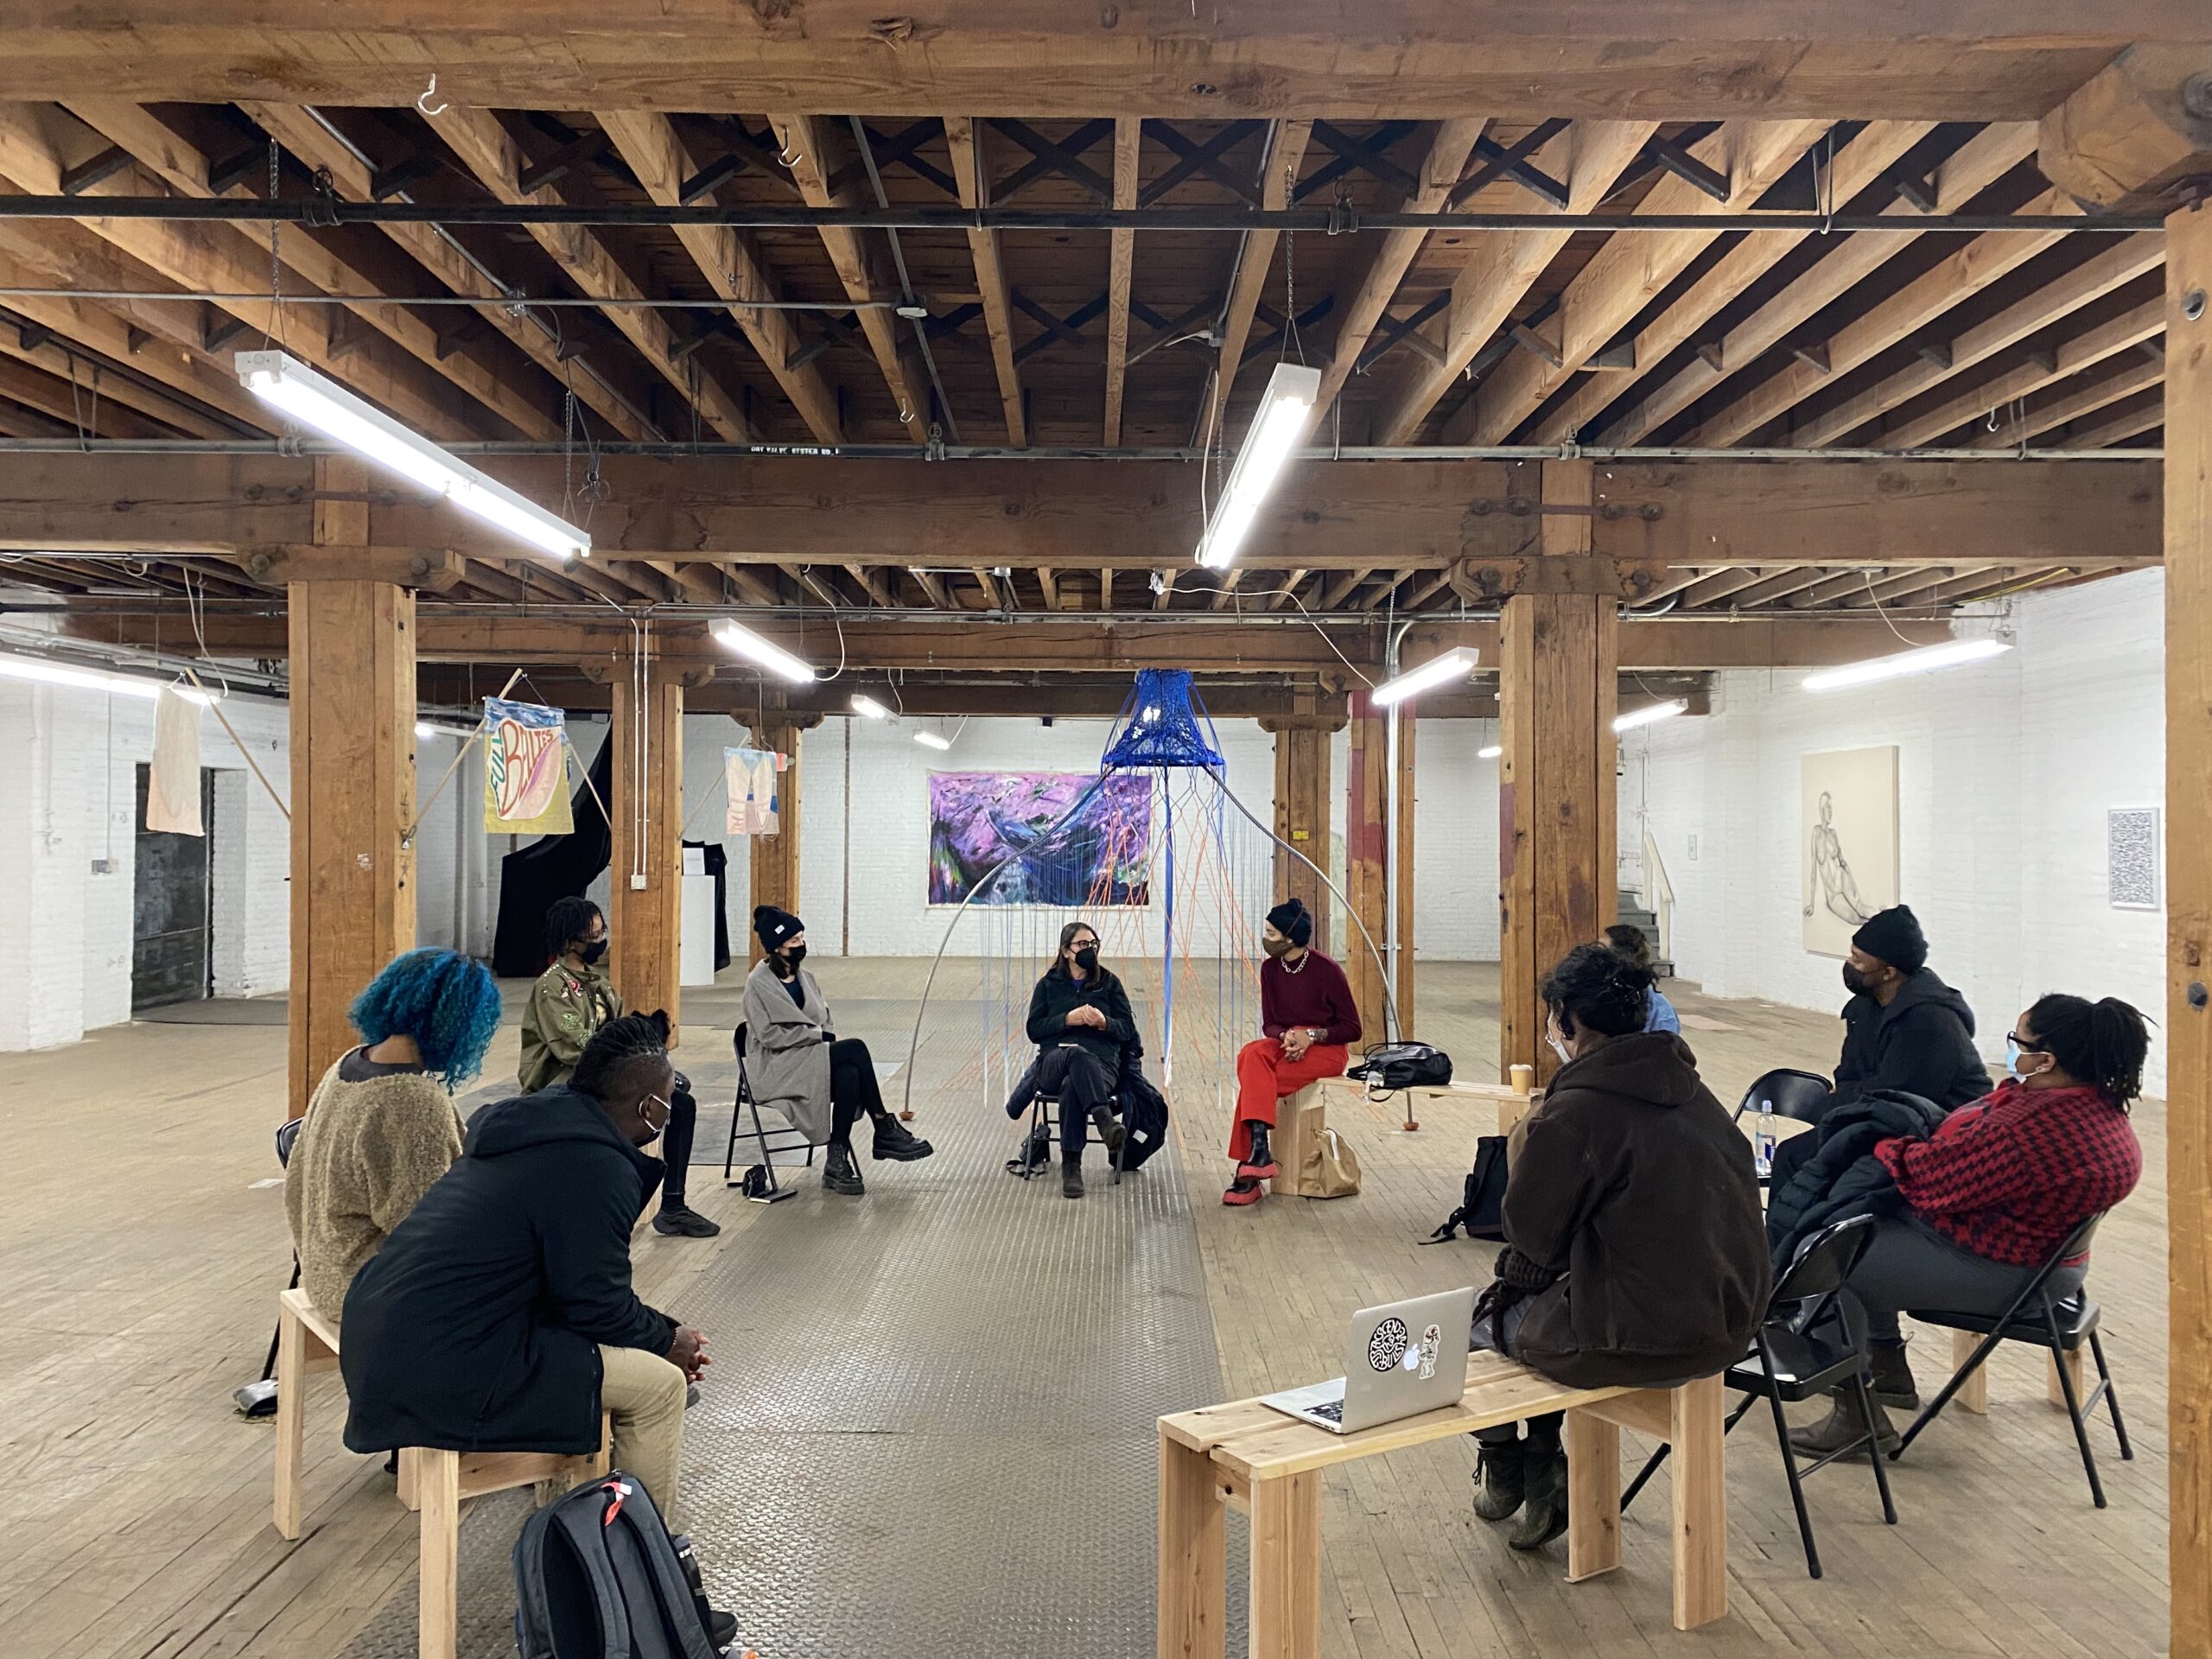 Circle of people in an industrial studio/gallery with artwork throughout.